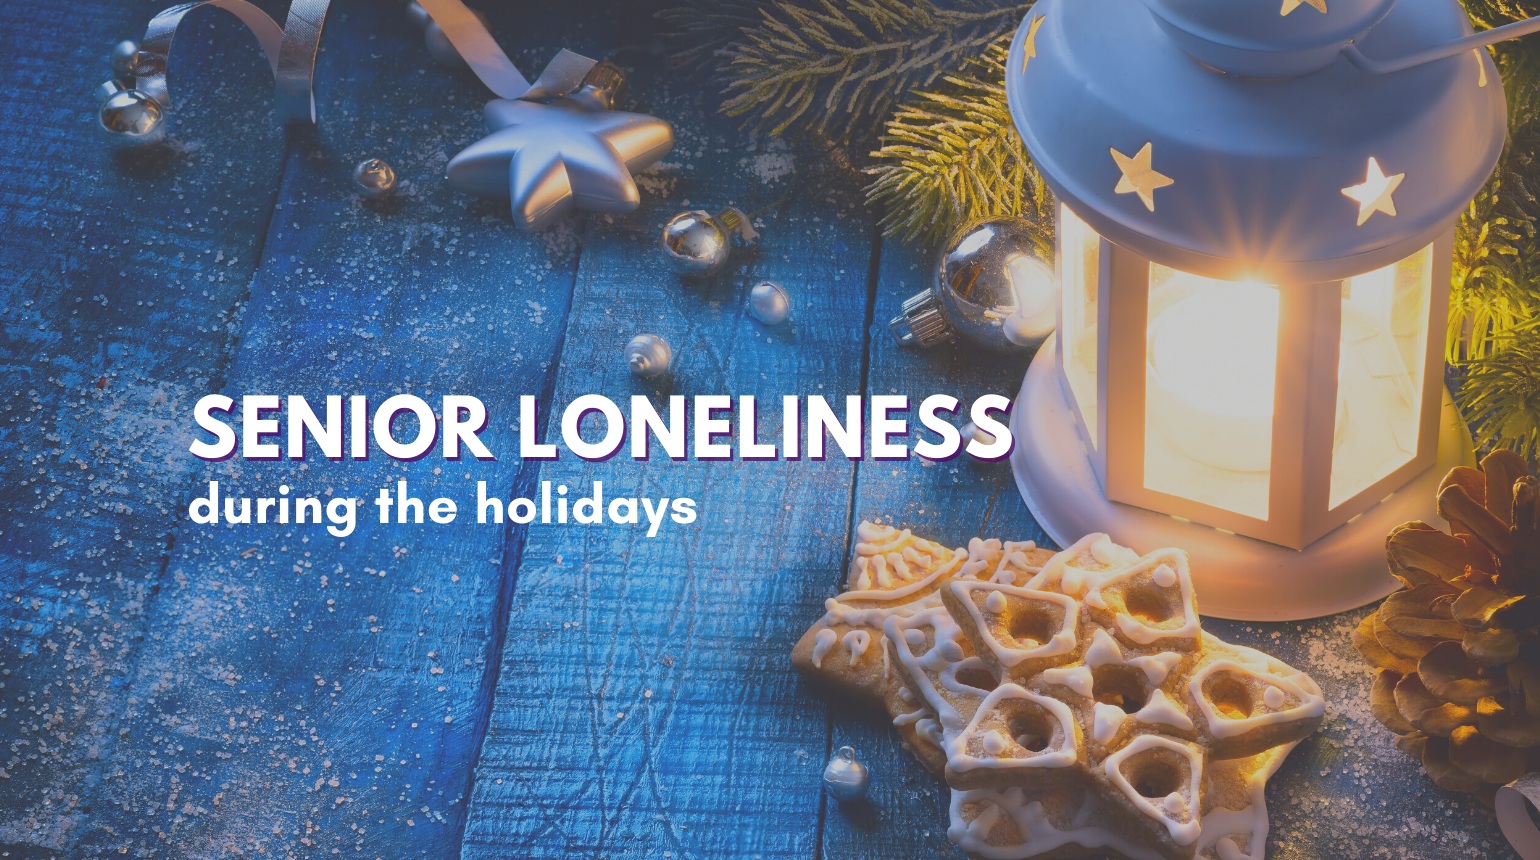 Senior Loneliness During the Holidays